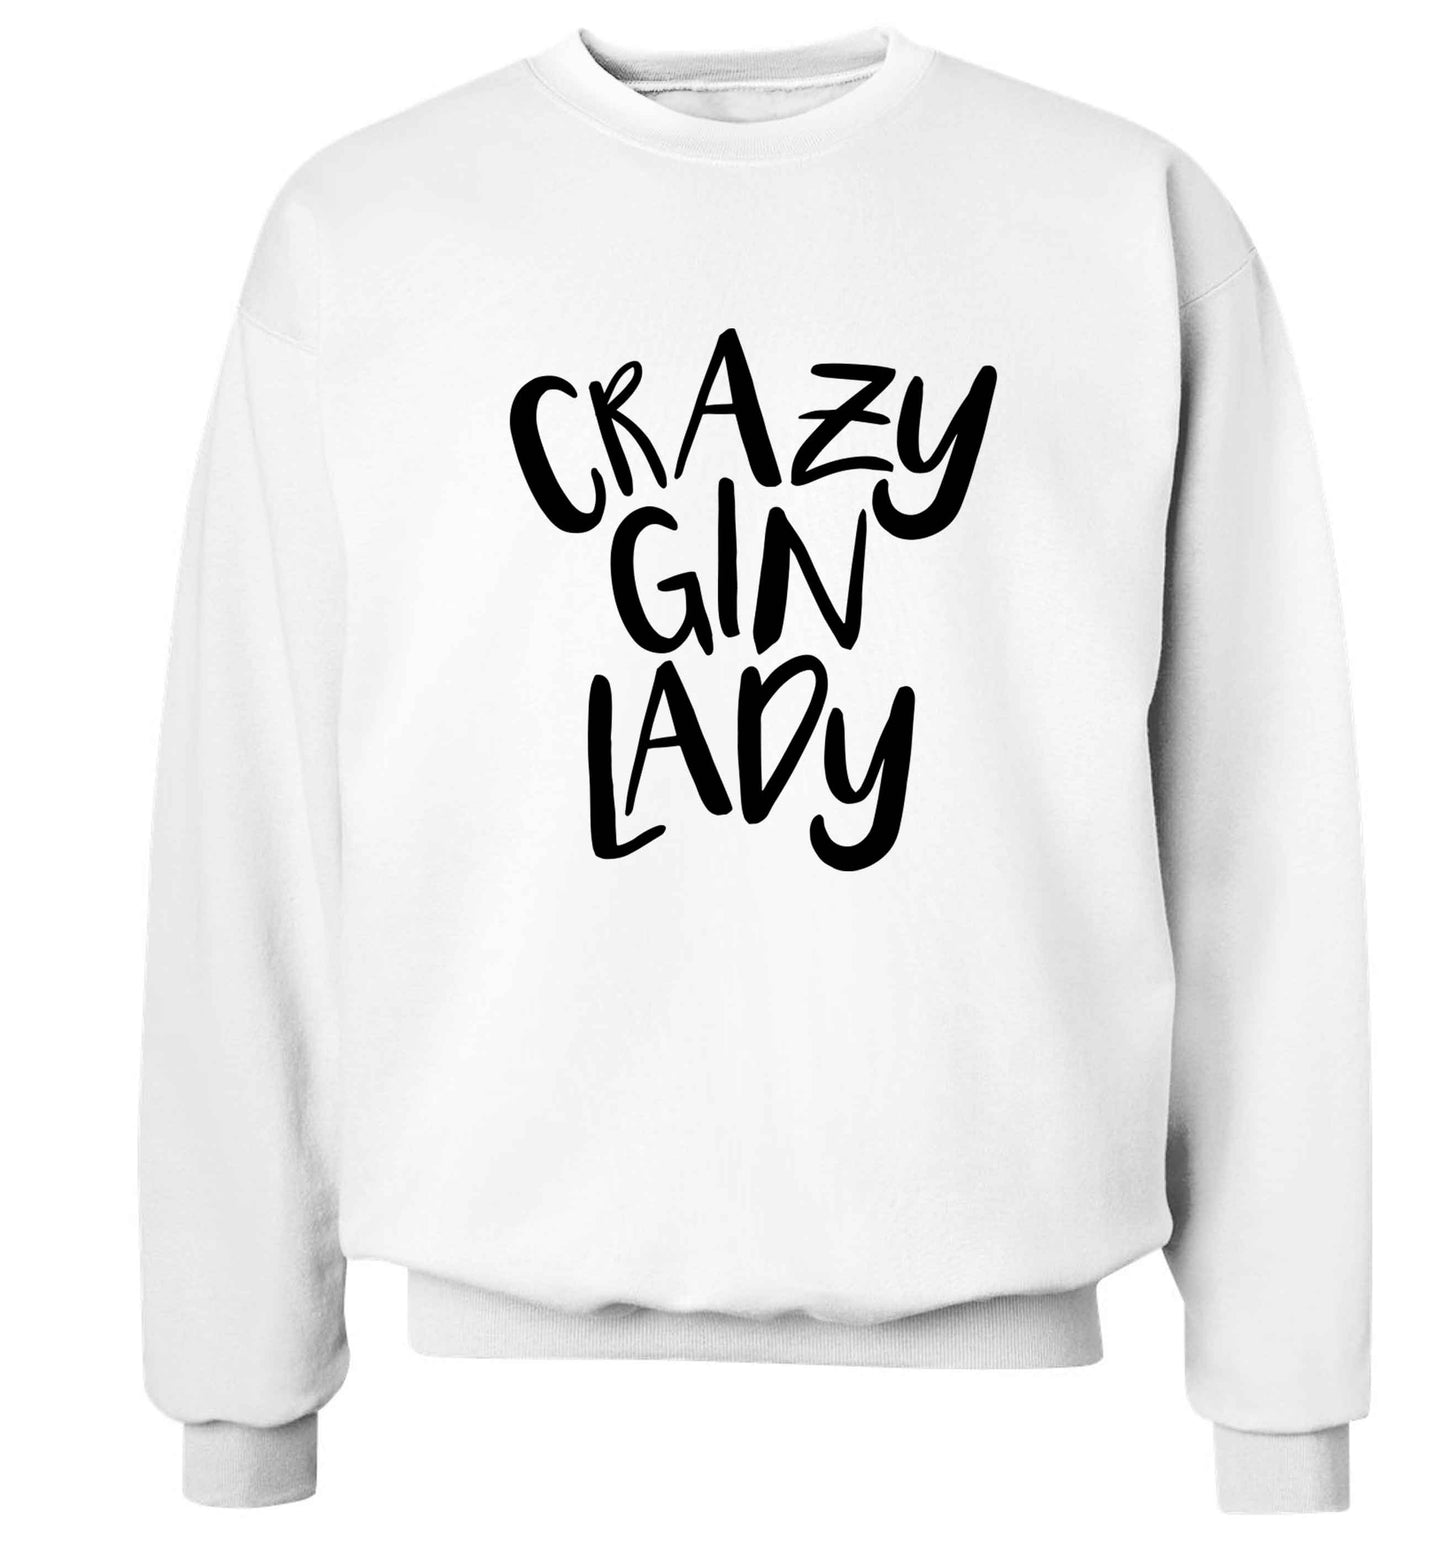 Crazy gin lady Adult's unisex white Sweater 2XL